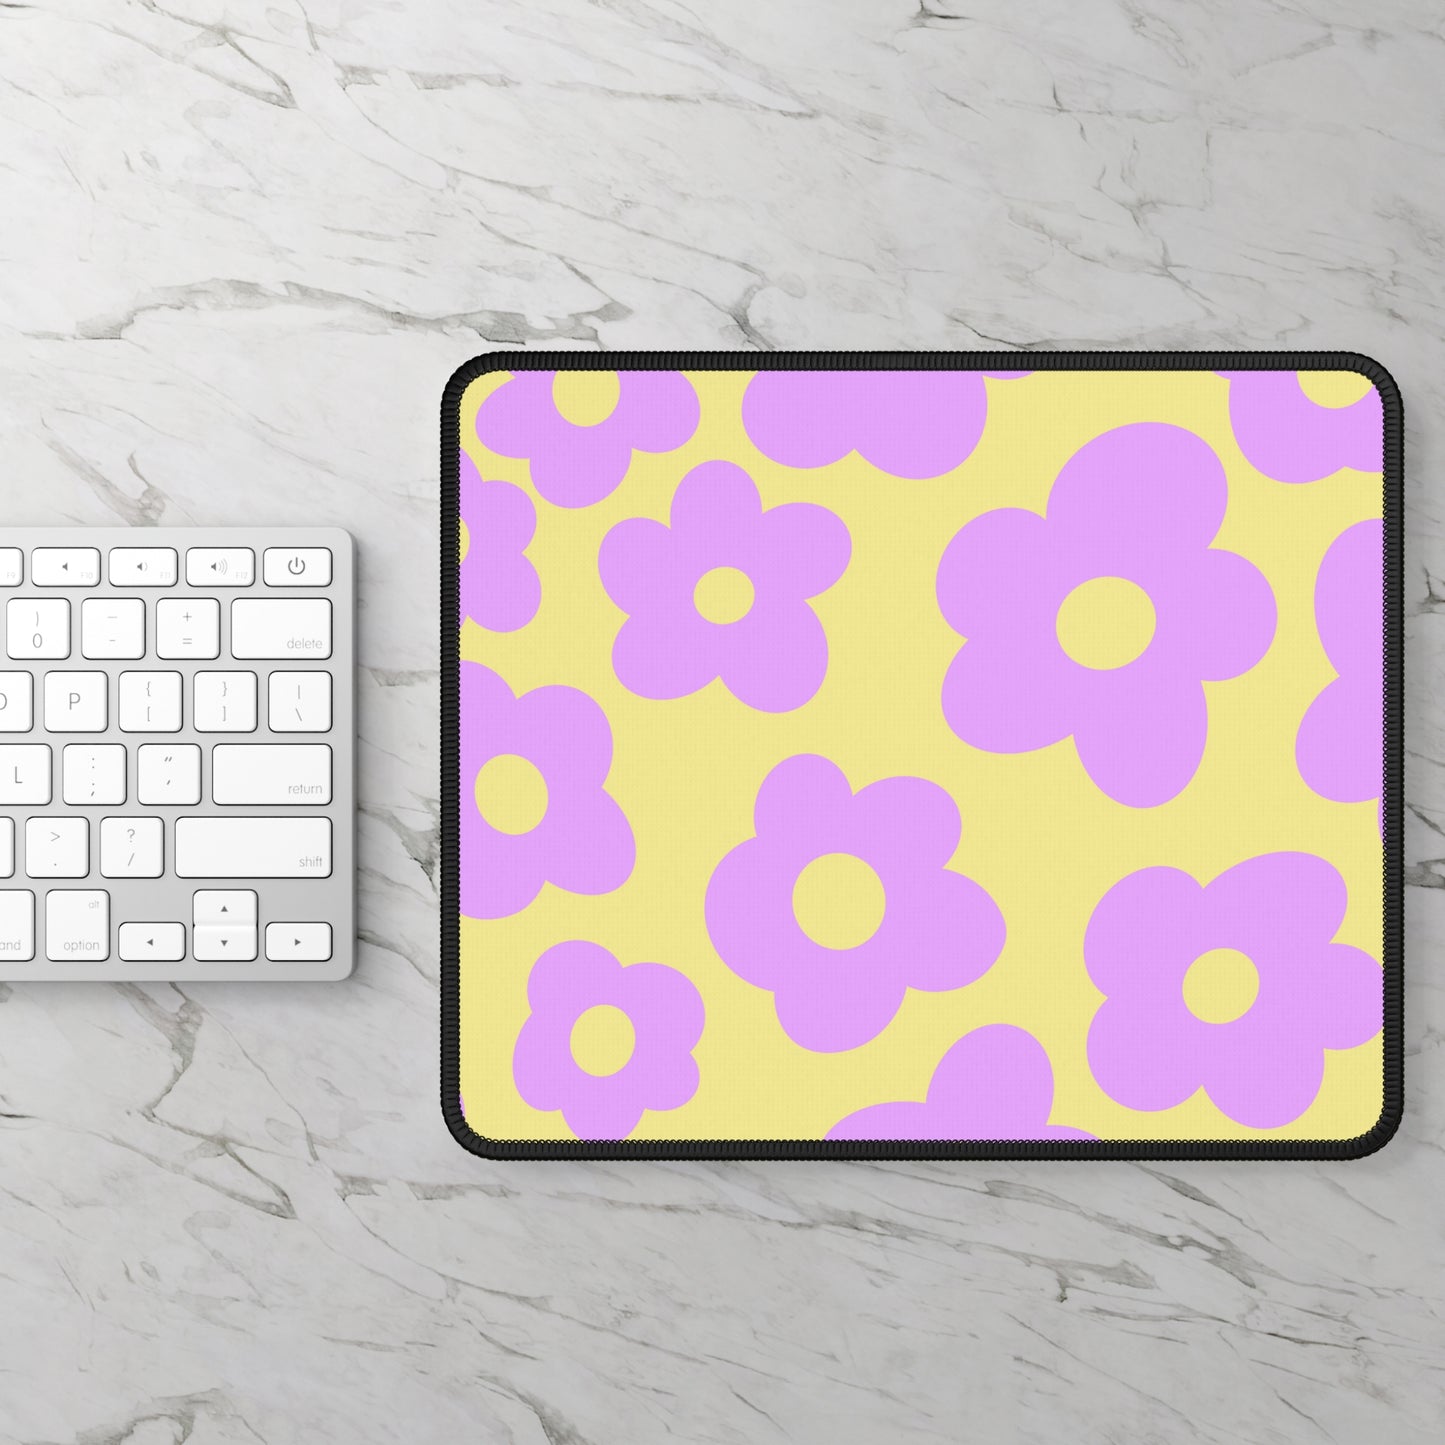 A gaming mouse pad with purple flowers on a yellow background sitting next to a keyboard.